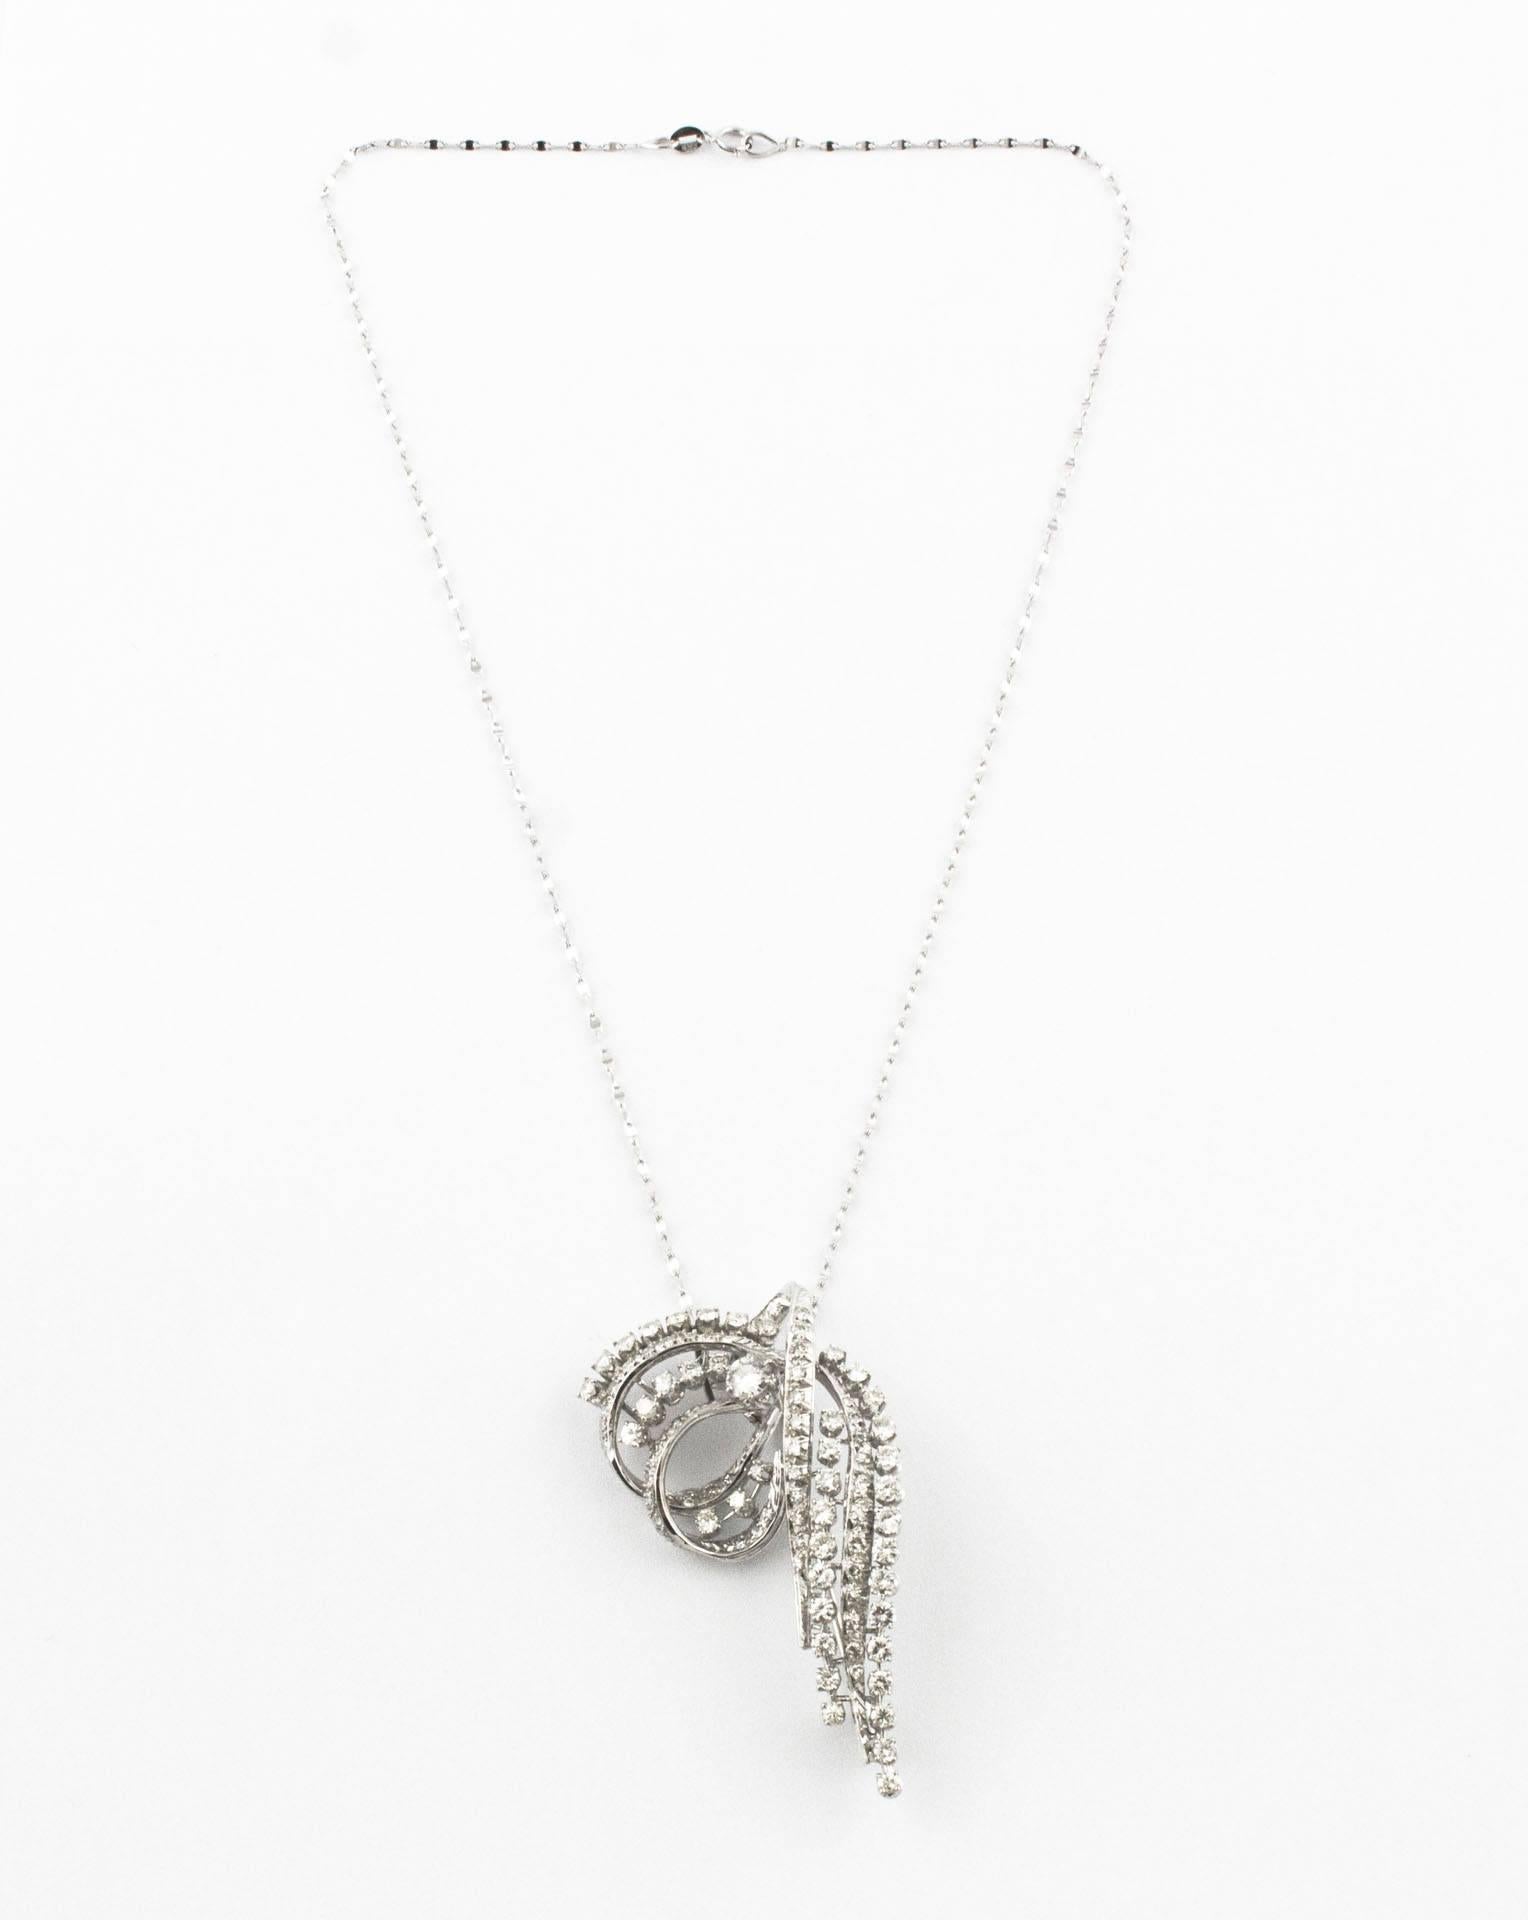 Delightful and Lovely pendant necklace/brooch in 18 kt white gold mounted with diamonds 
total weight 10,80 g
R.F OUCH 